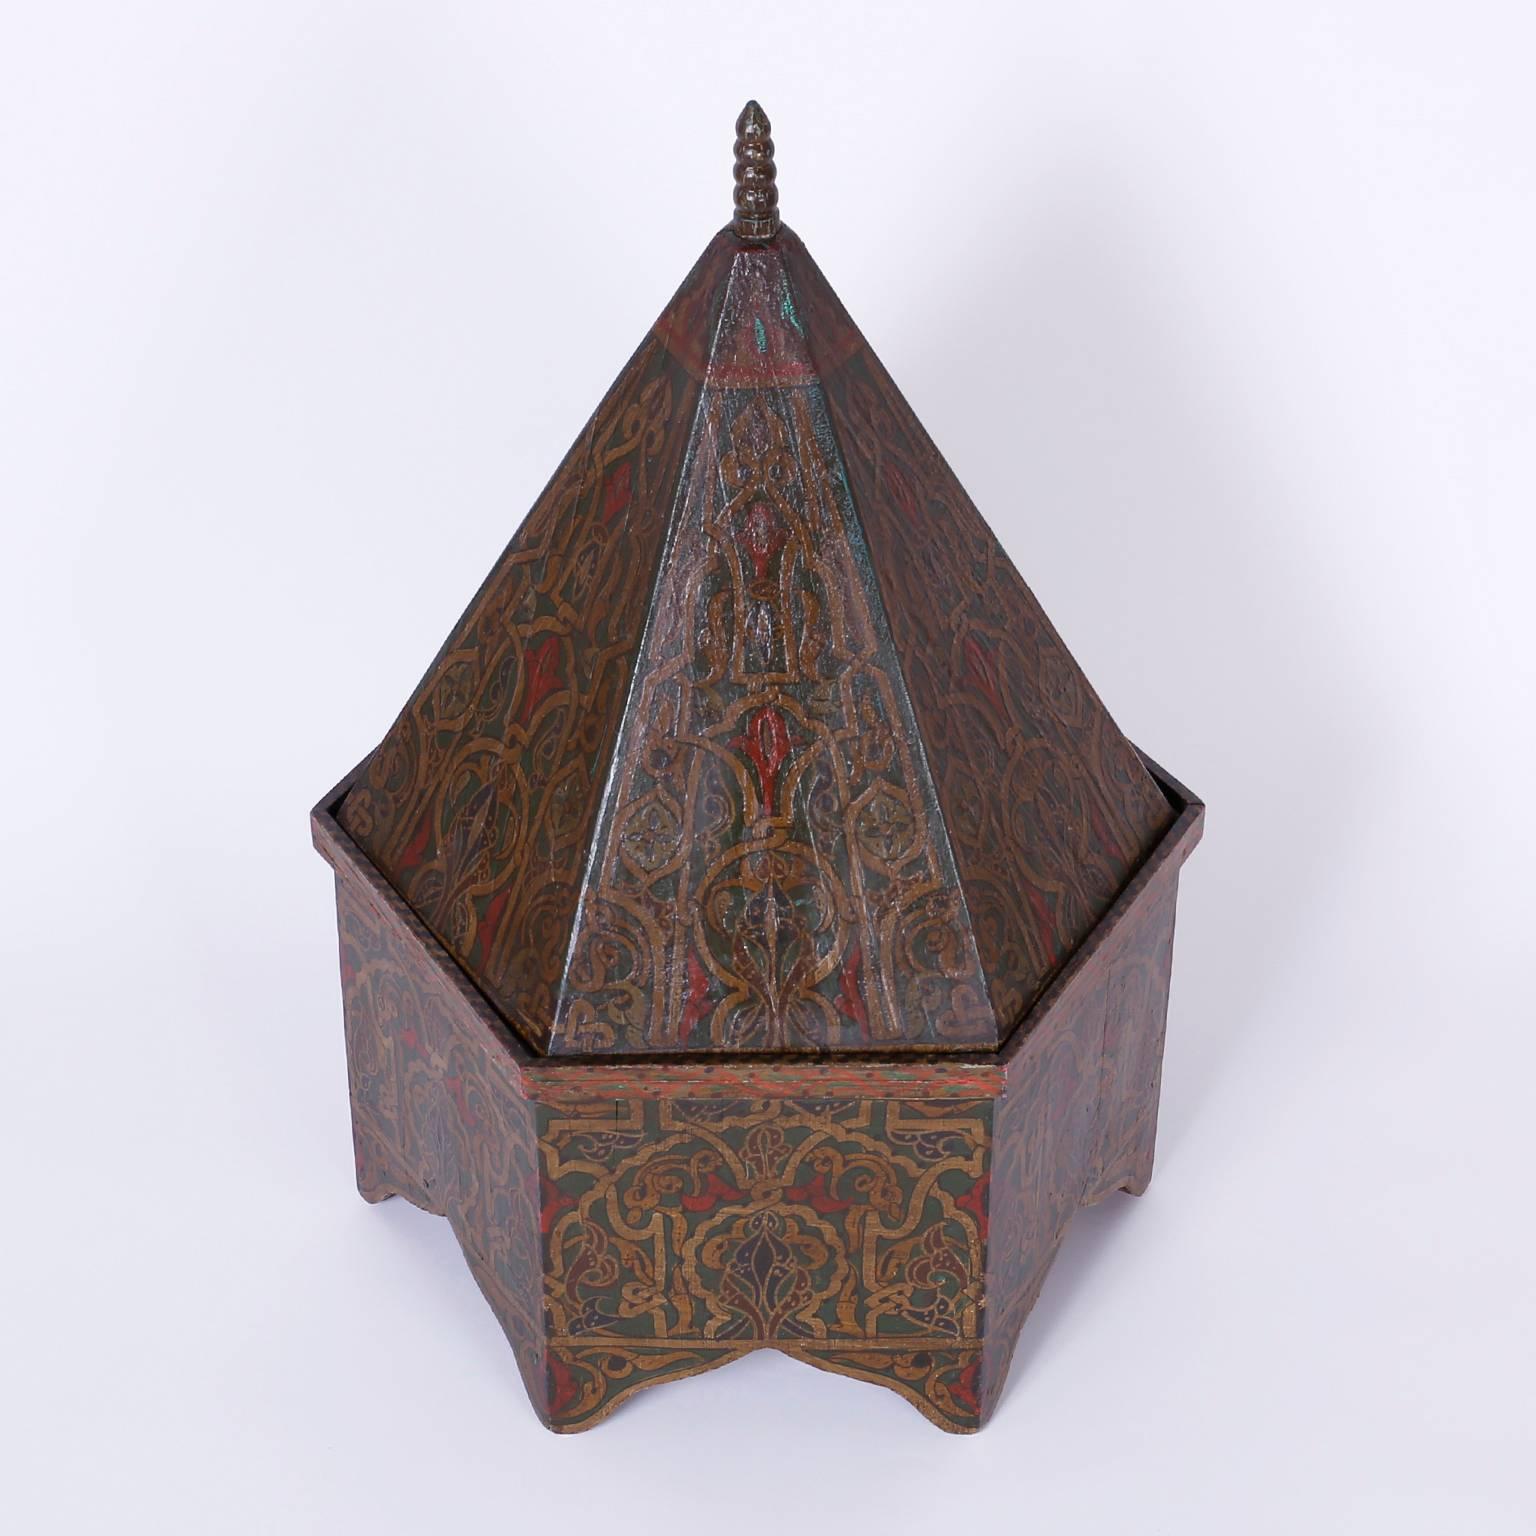 Antique Moroccan wood box painted on all six sides with symbolic floral designs over an architecturally intriguing form and a removable pitched lid.